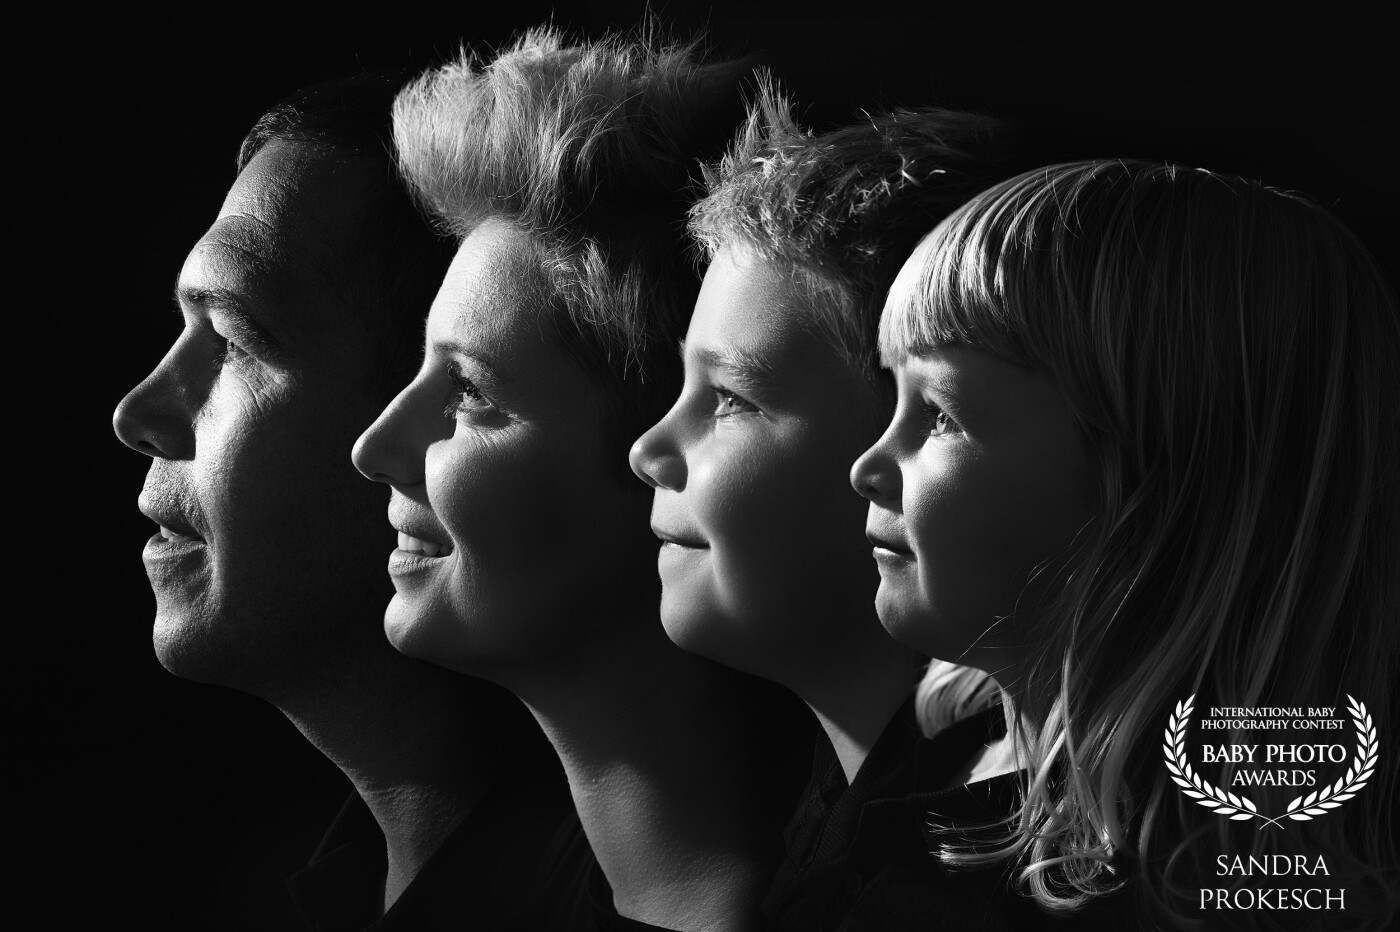 This beautiful family wanted something special, a portrait that will be watched every day, a portrait that will decorate their house. I photographed all four people separately and then created one picture in photoshop. My intention was to capture the same light and shadows in all four shapes. I'm glad I made the next family happy. These are memories for many generations.